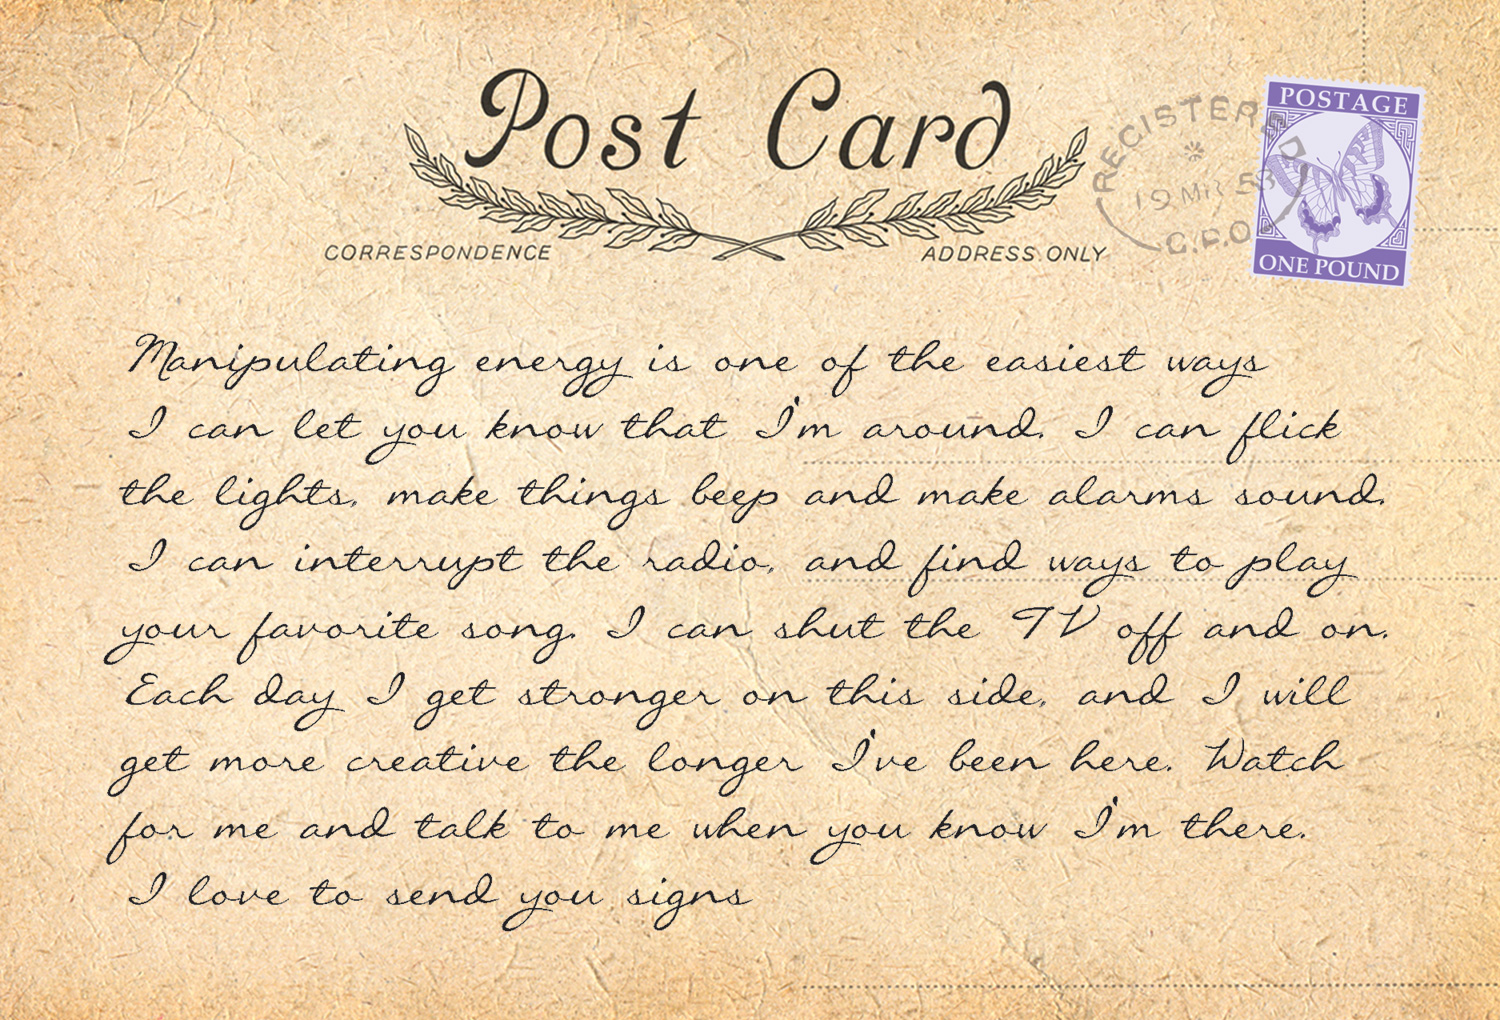 POSTCARDS FROM HEAVEN 2 - back 16